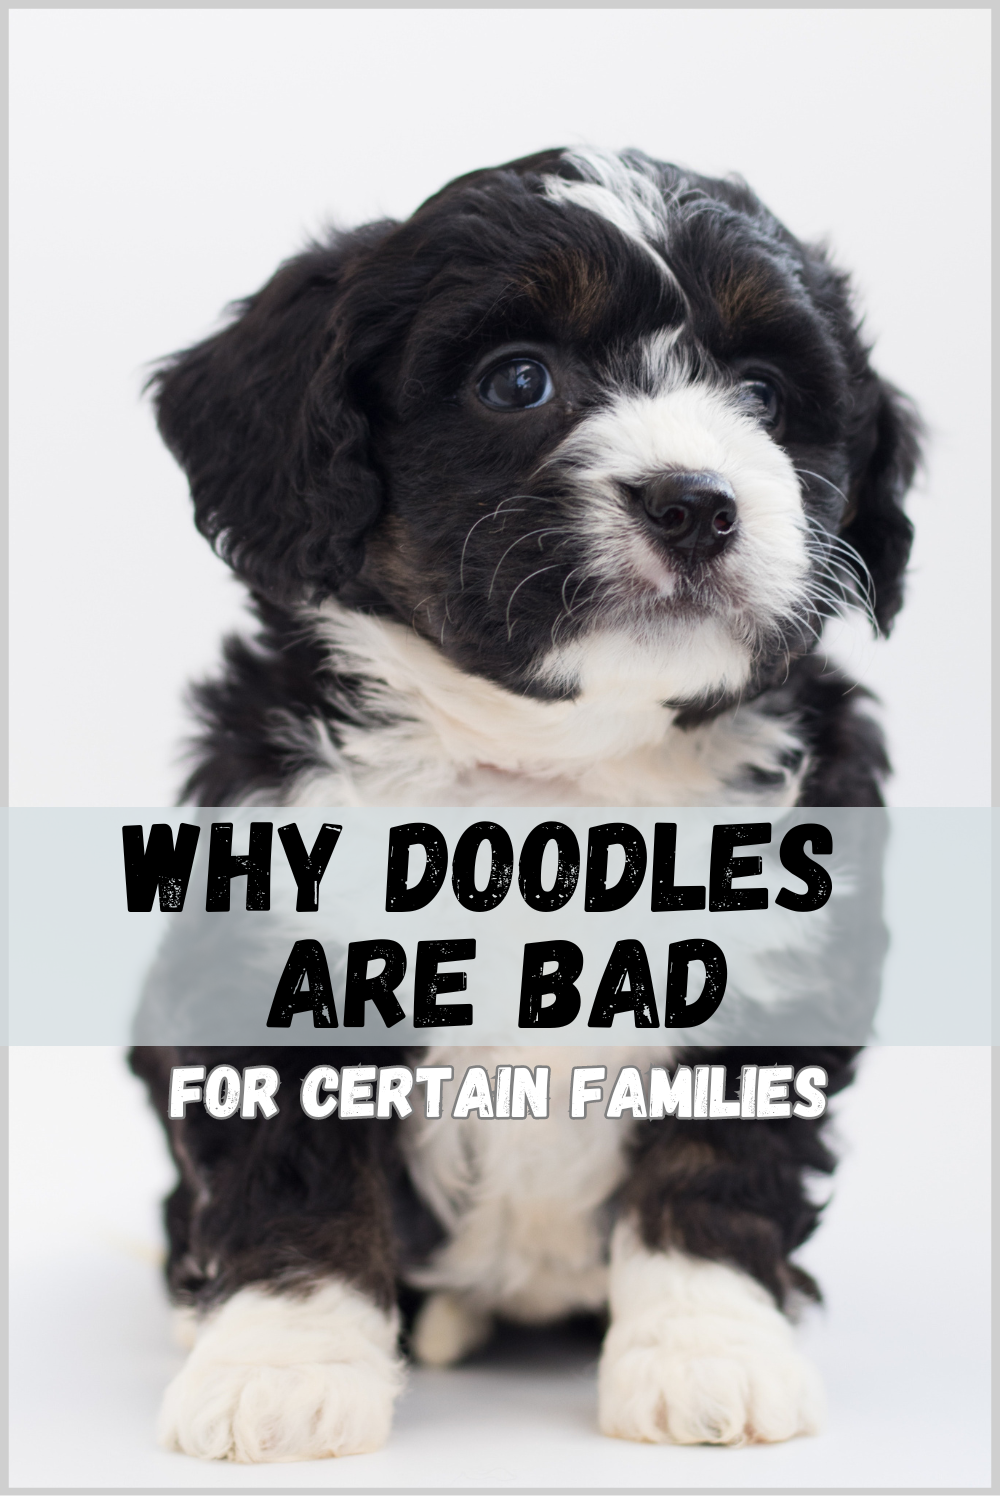 Why doodles are bad for certain families